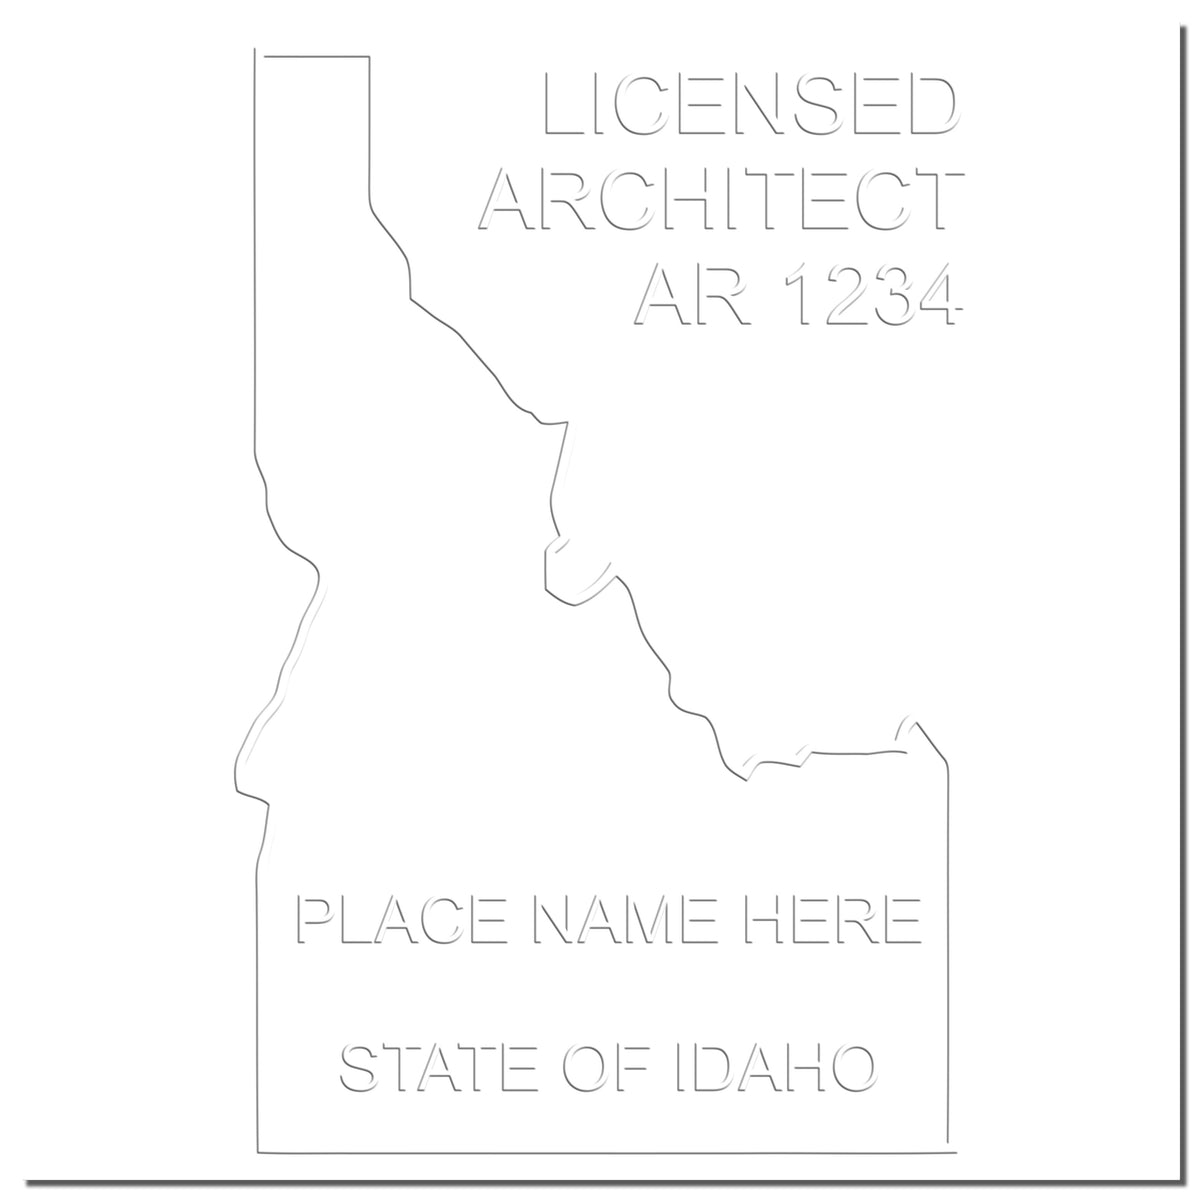 This paper is stamped with a sample imprint of the Heavy Duty Cast Iron Idaho Architect Embosser, signifying its quality and reliability.